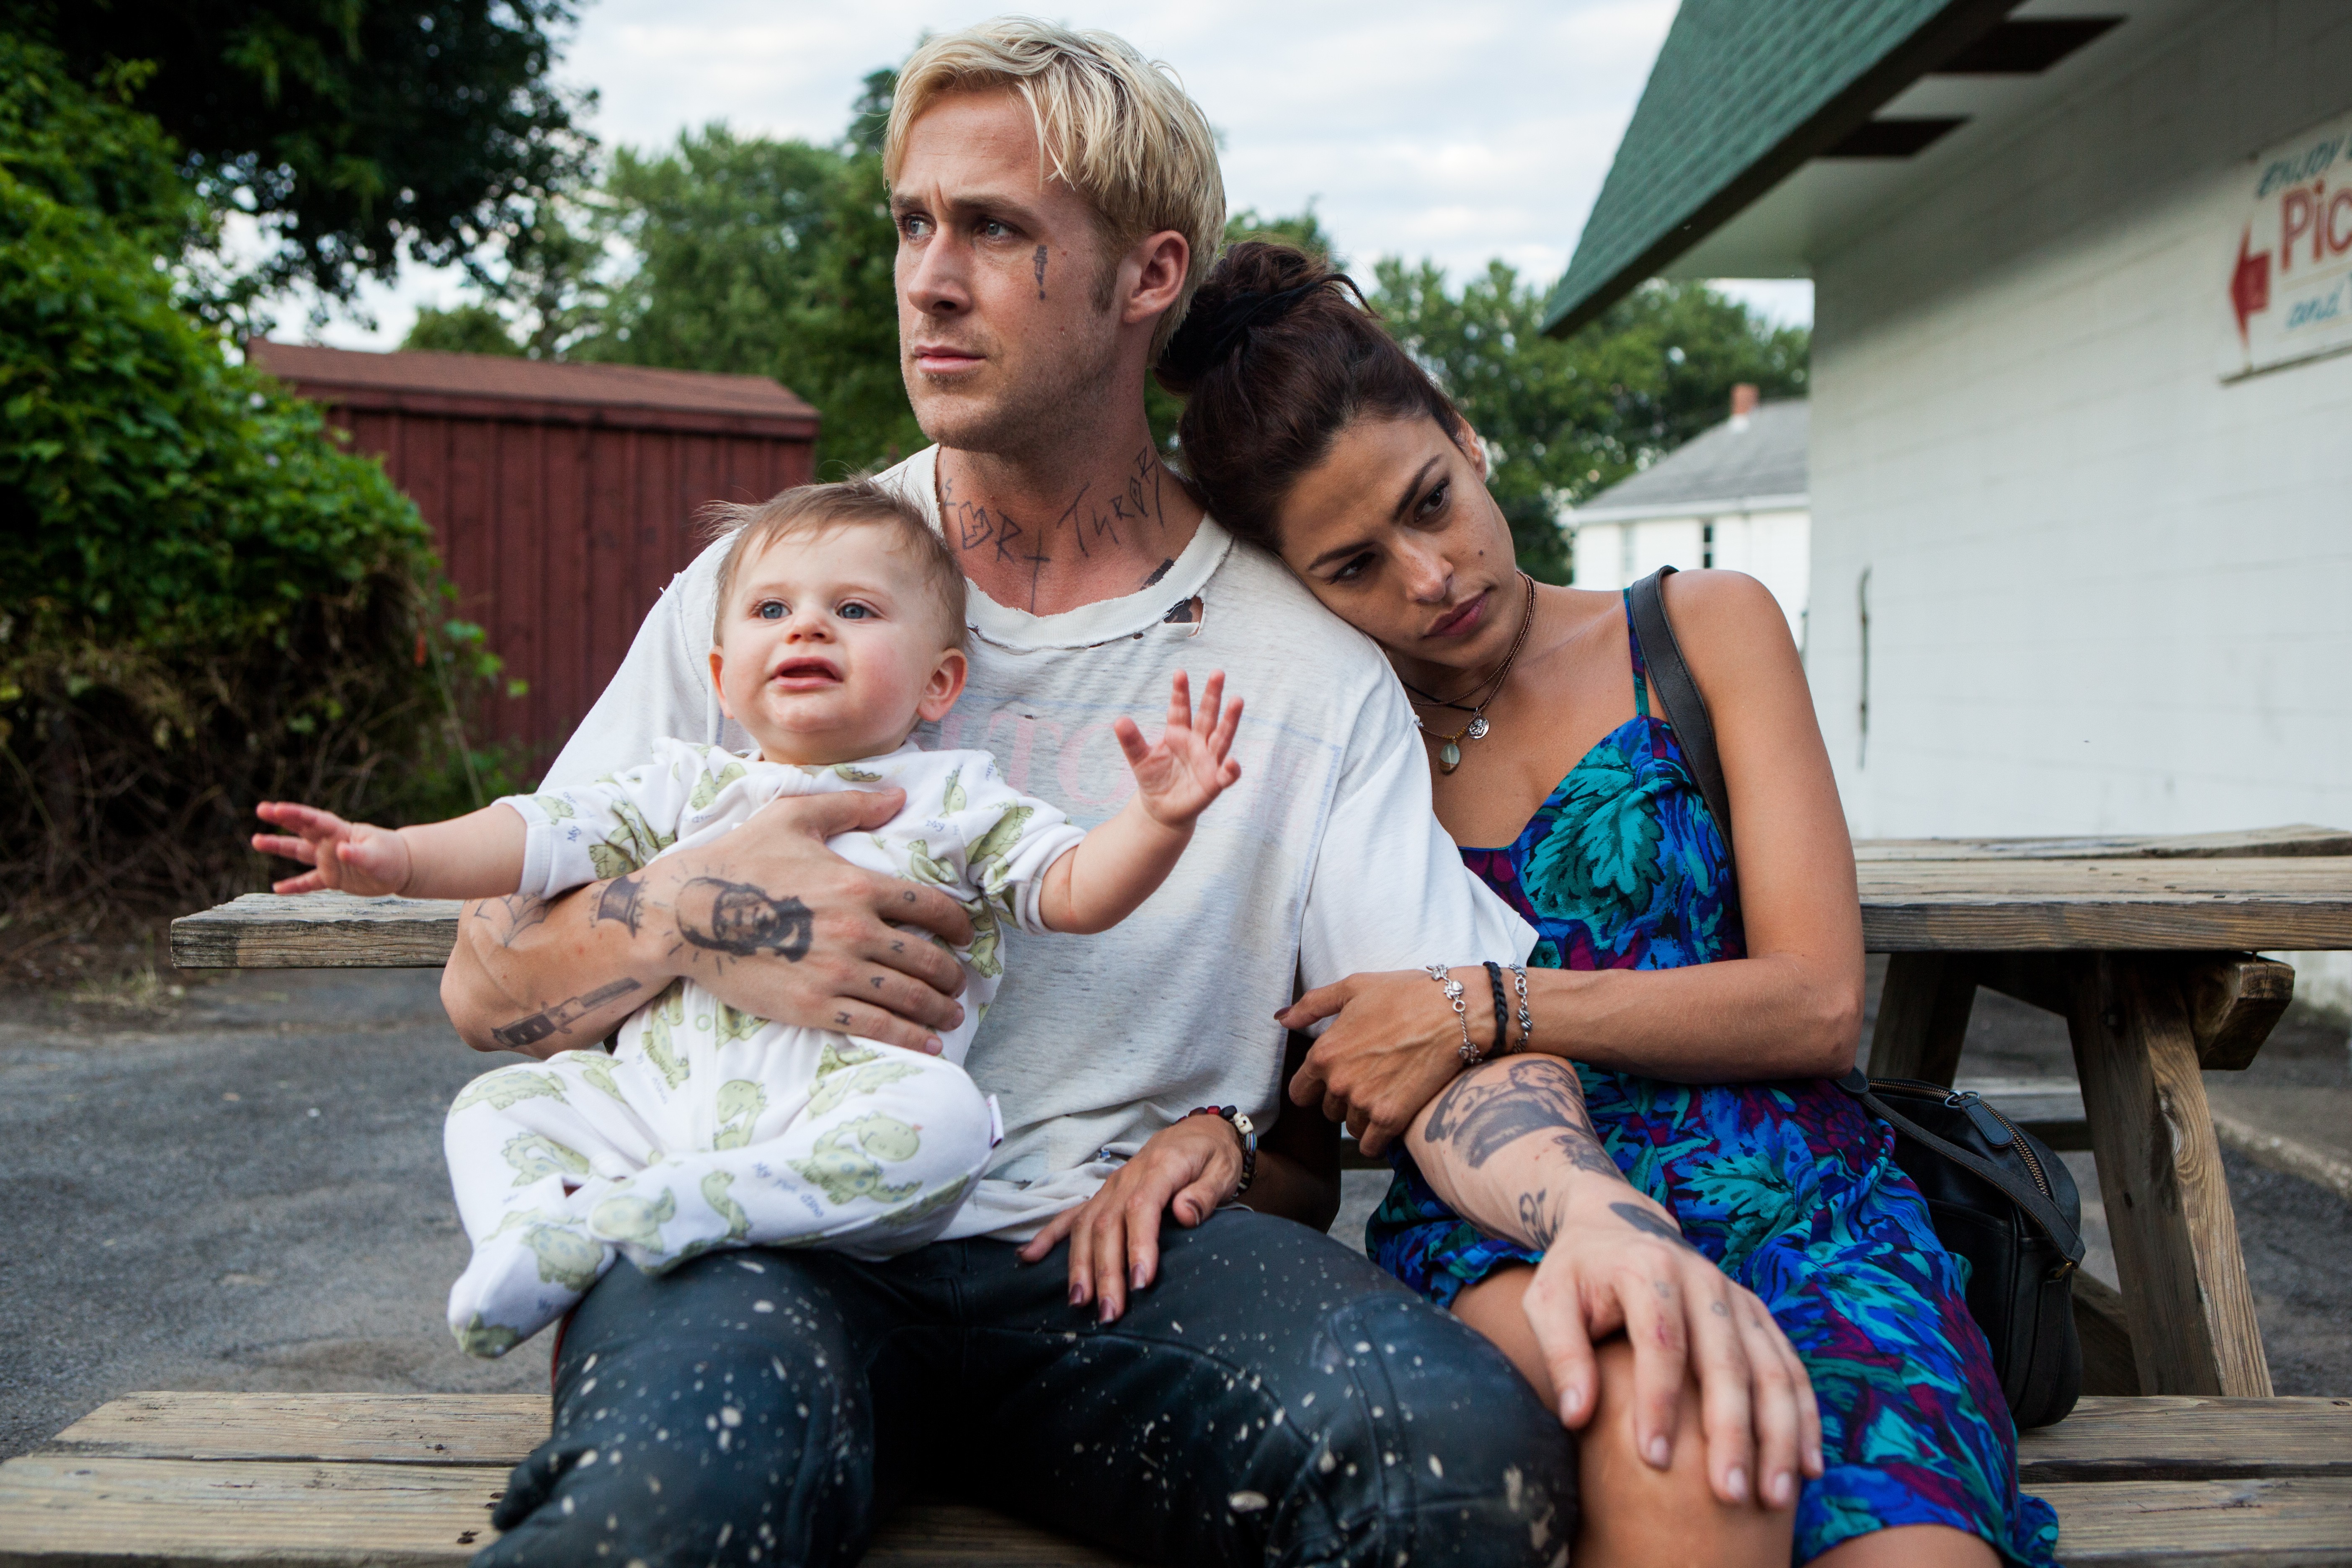 Eva Mendes Luke The Place Beyond The Pines Romina The Place Beyond The Pines Ryan Gosling 5616x3744